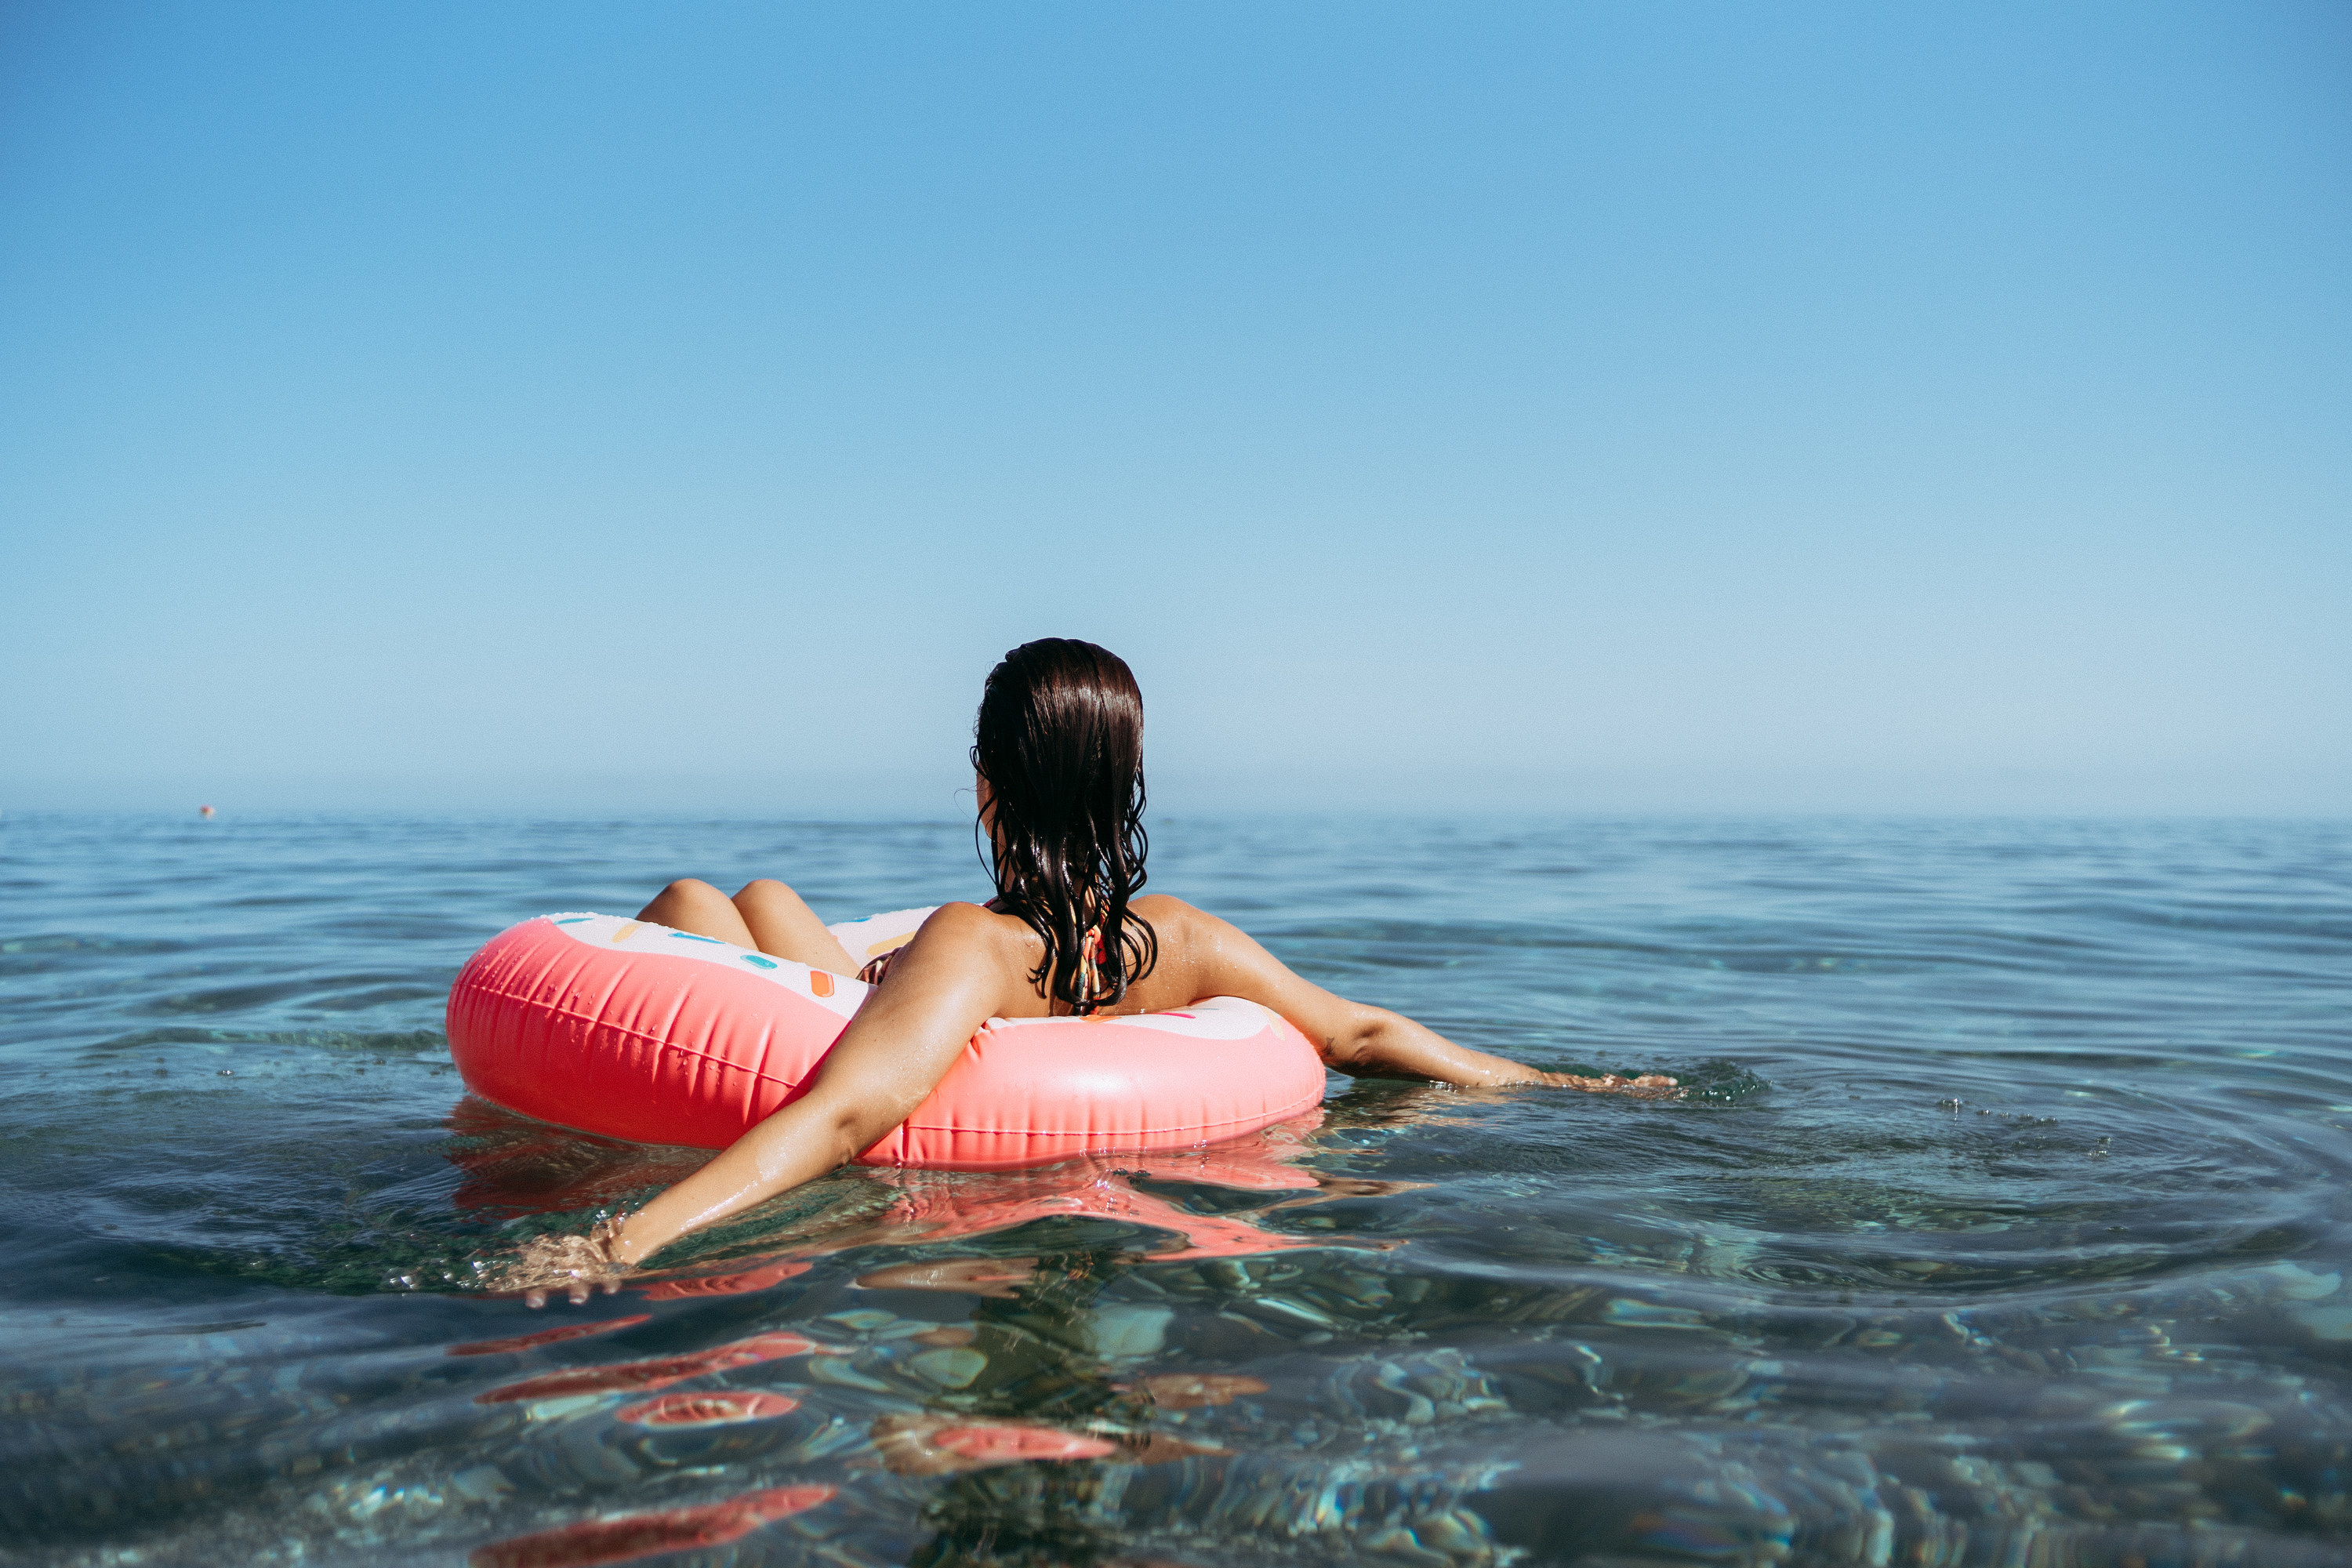 a person sitting on a floating device in the ocean